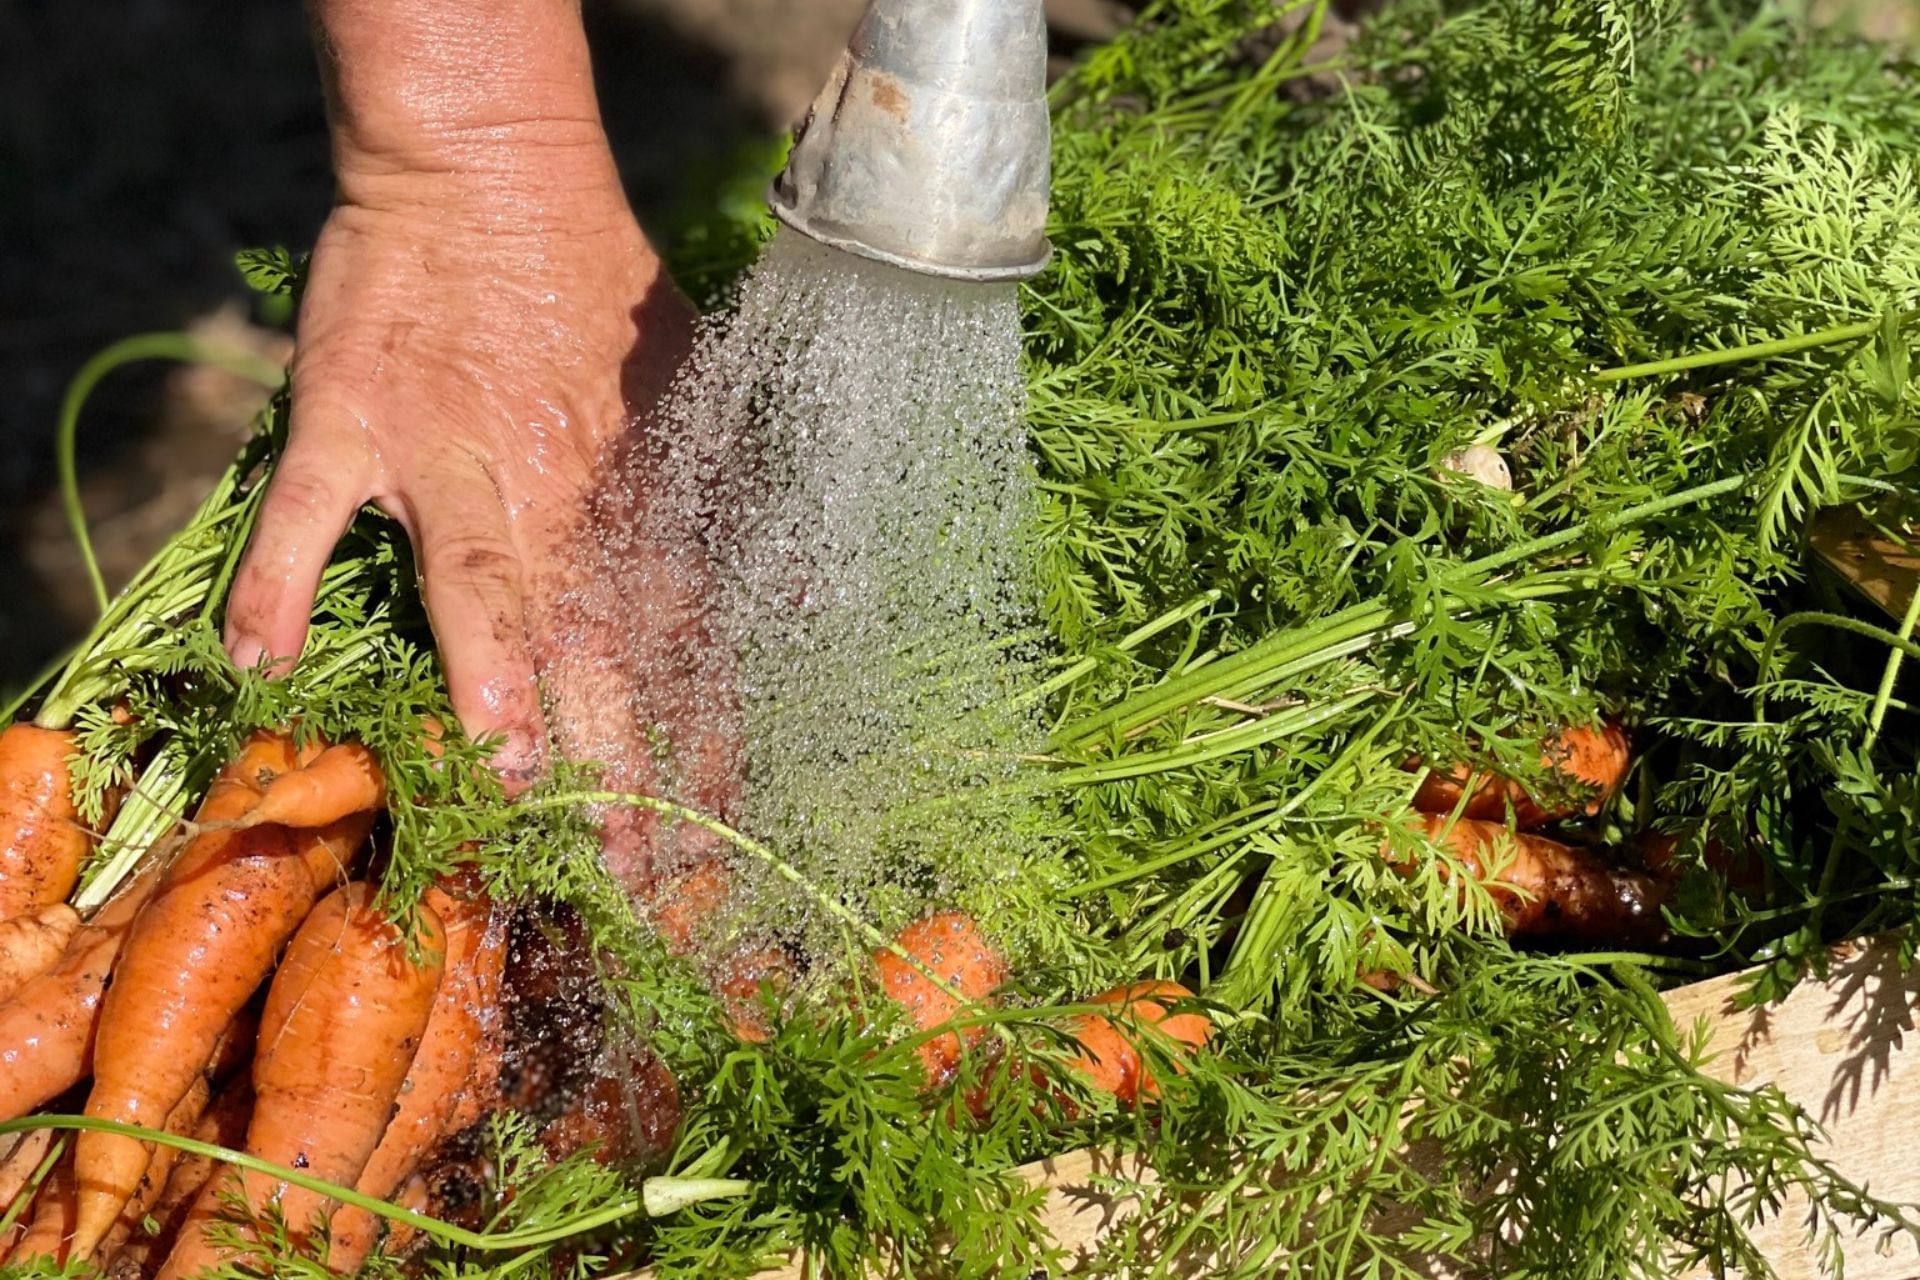 Man washing the carrots at Domaine de Manville